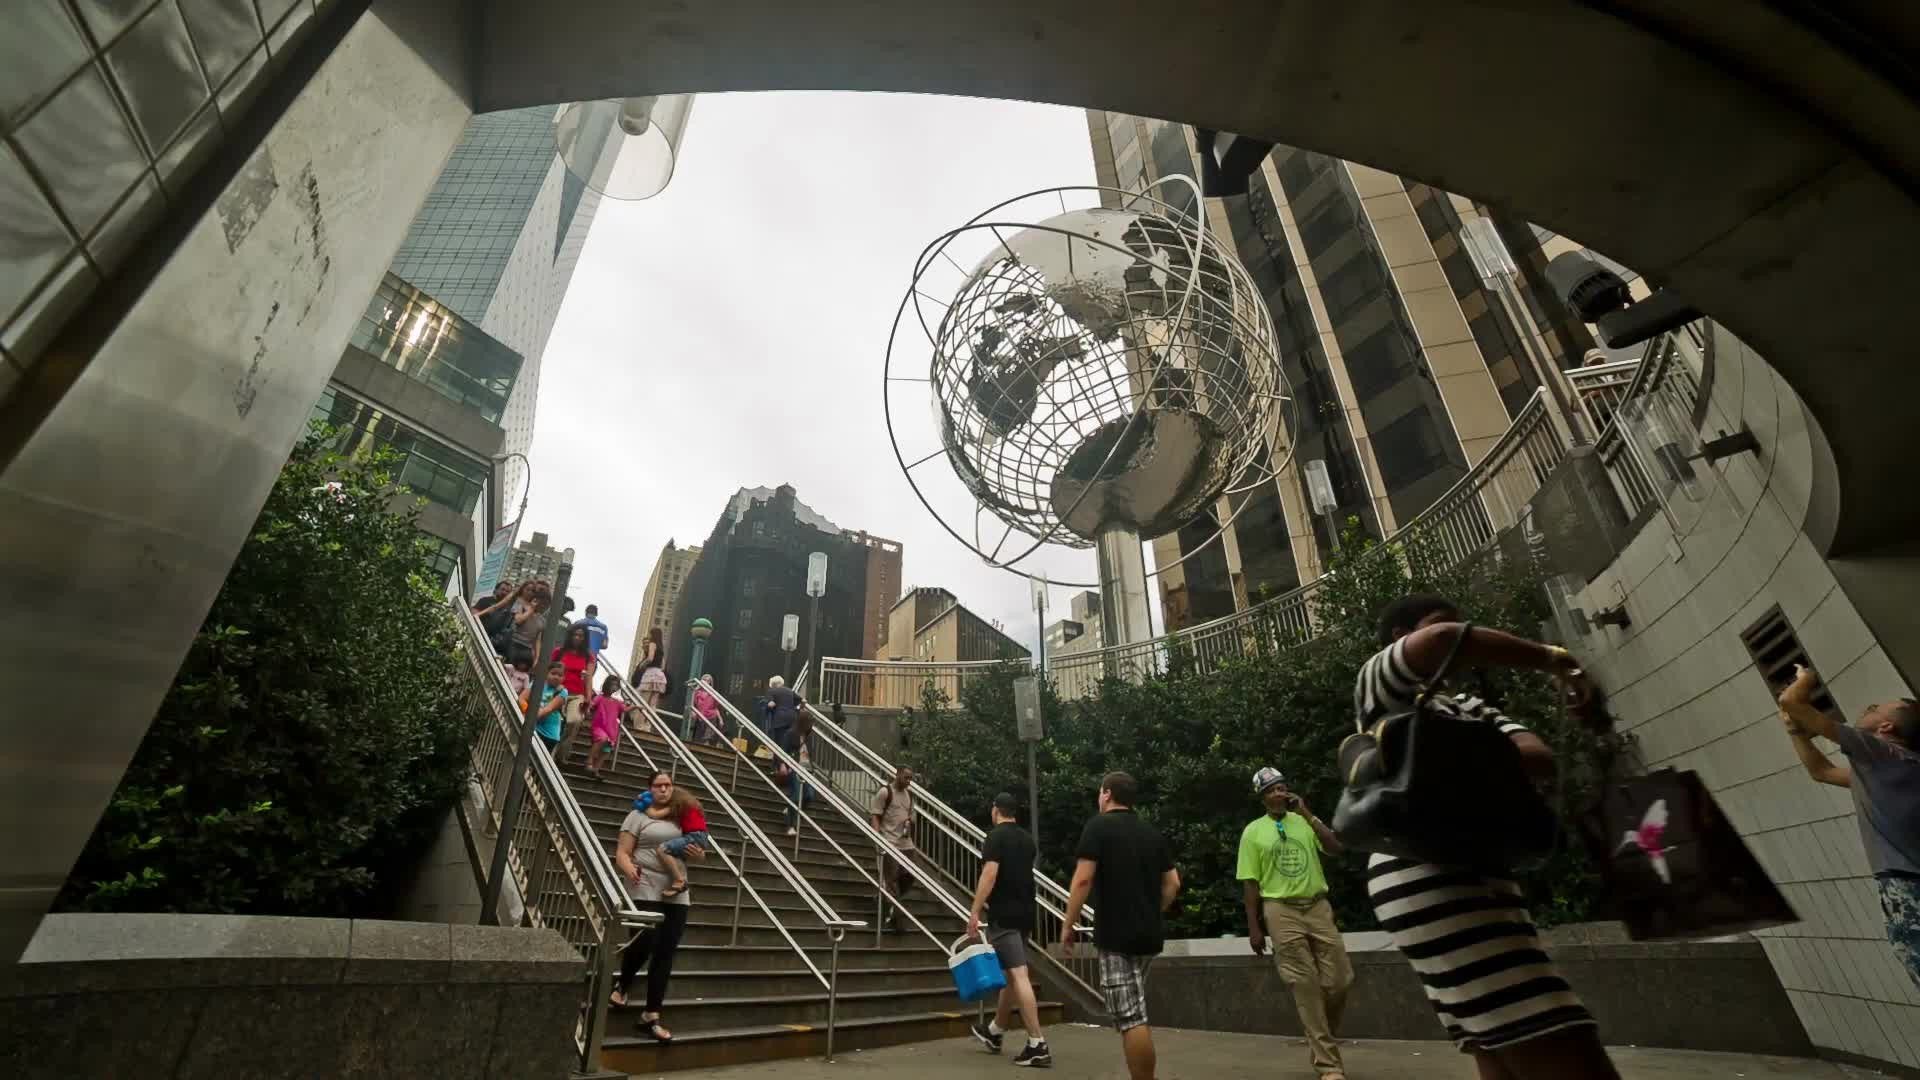 Columbus Circle subway station with Steel Globe sculpture and people walking down stairs on summer day in NYC